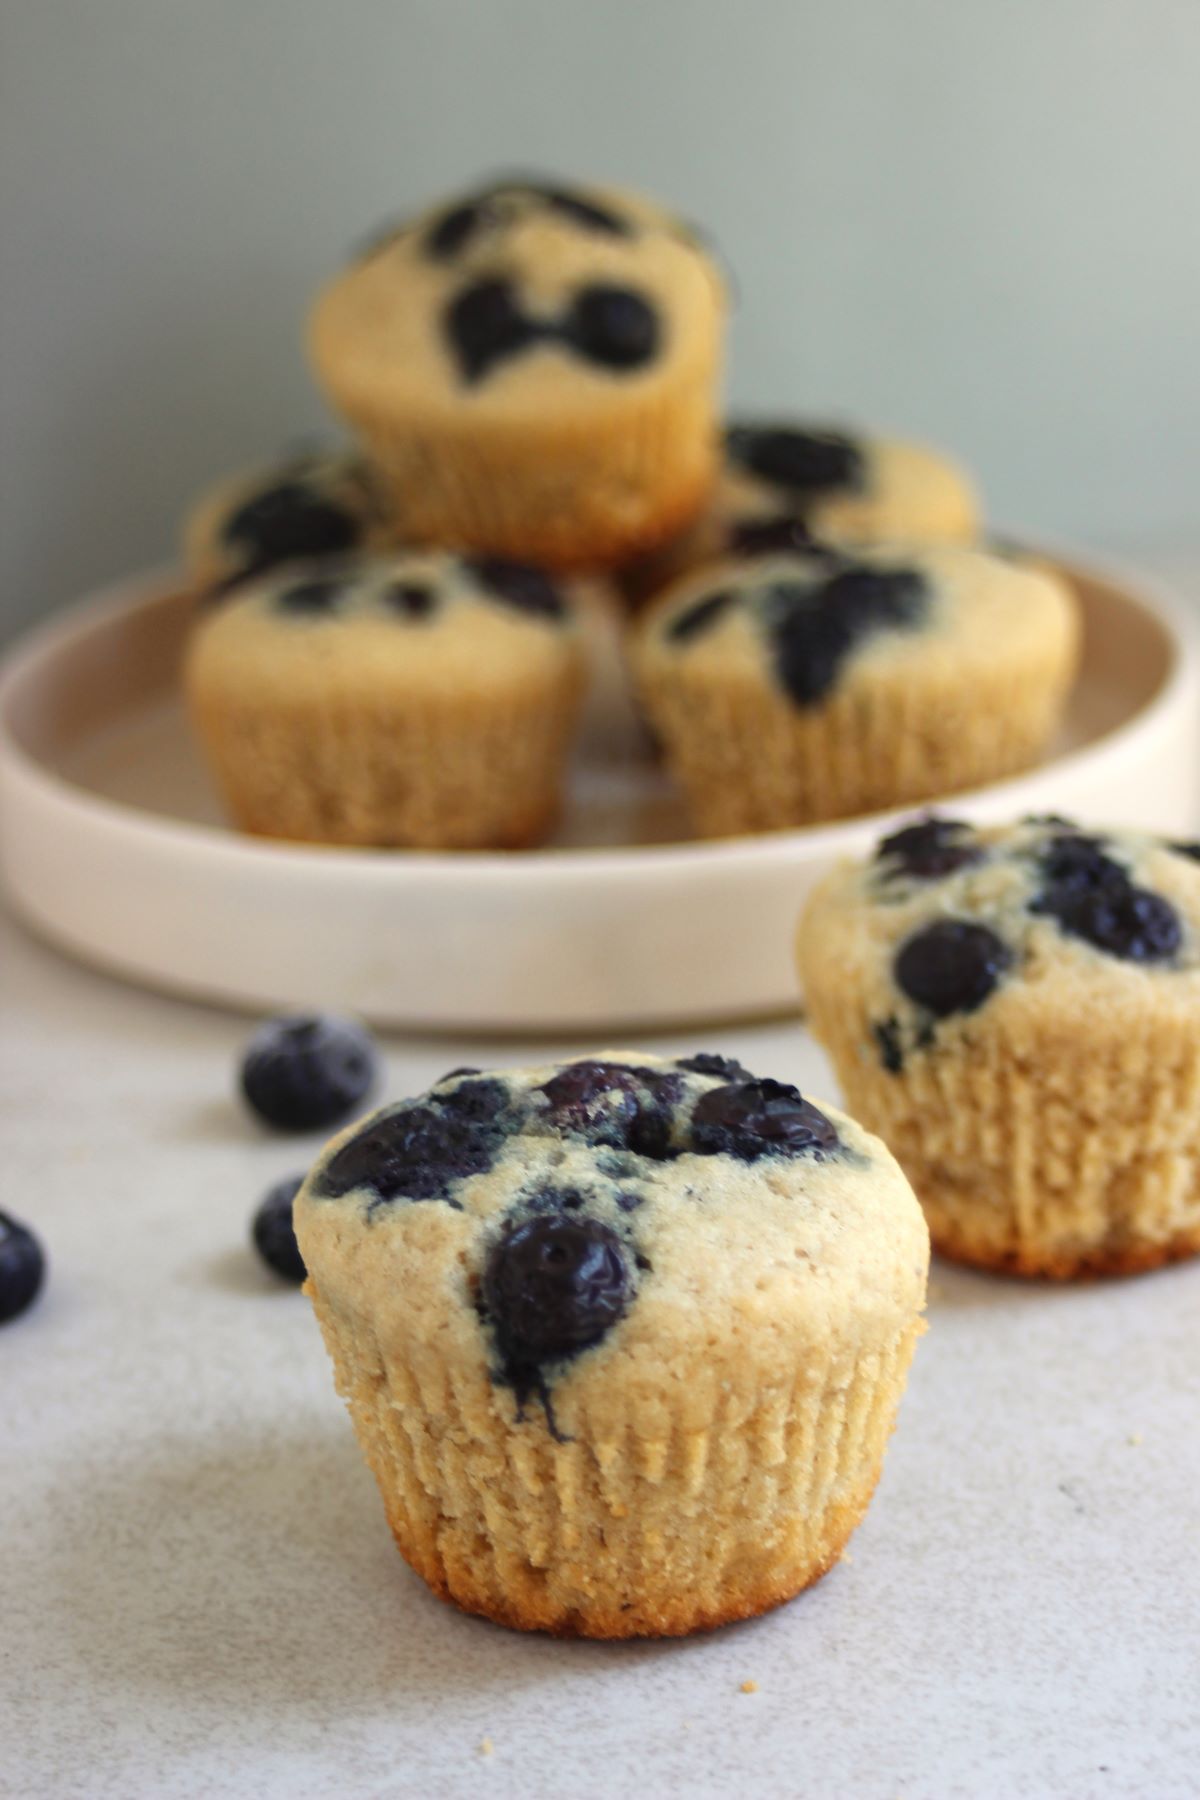 Blueberry muffin on a white surface. More muffins behind.